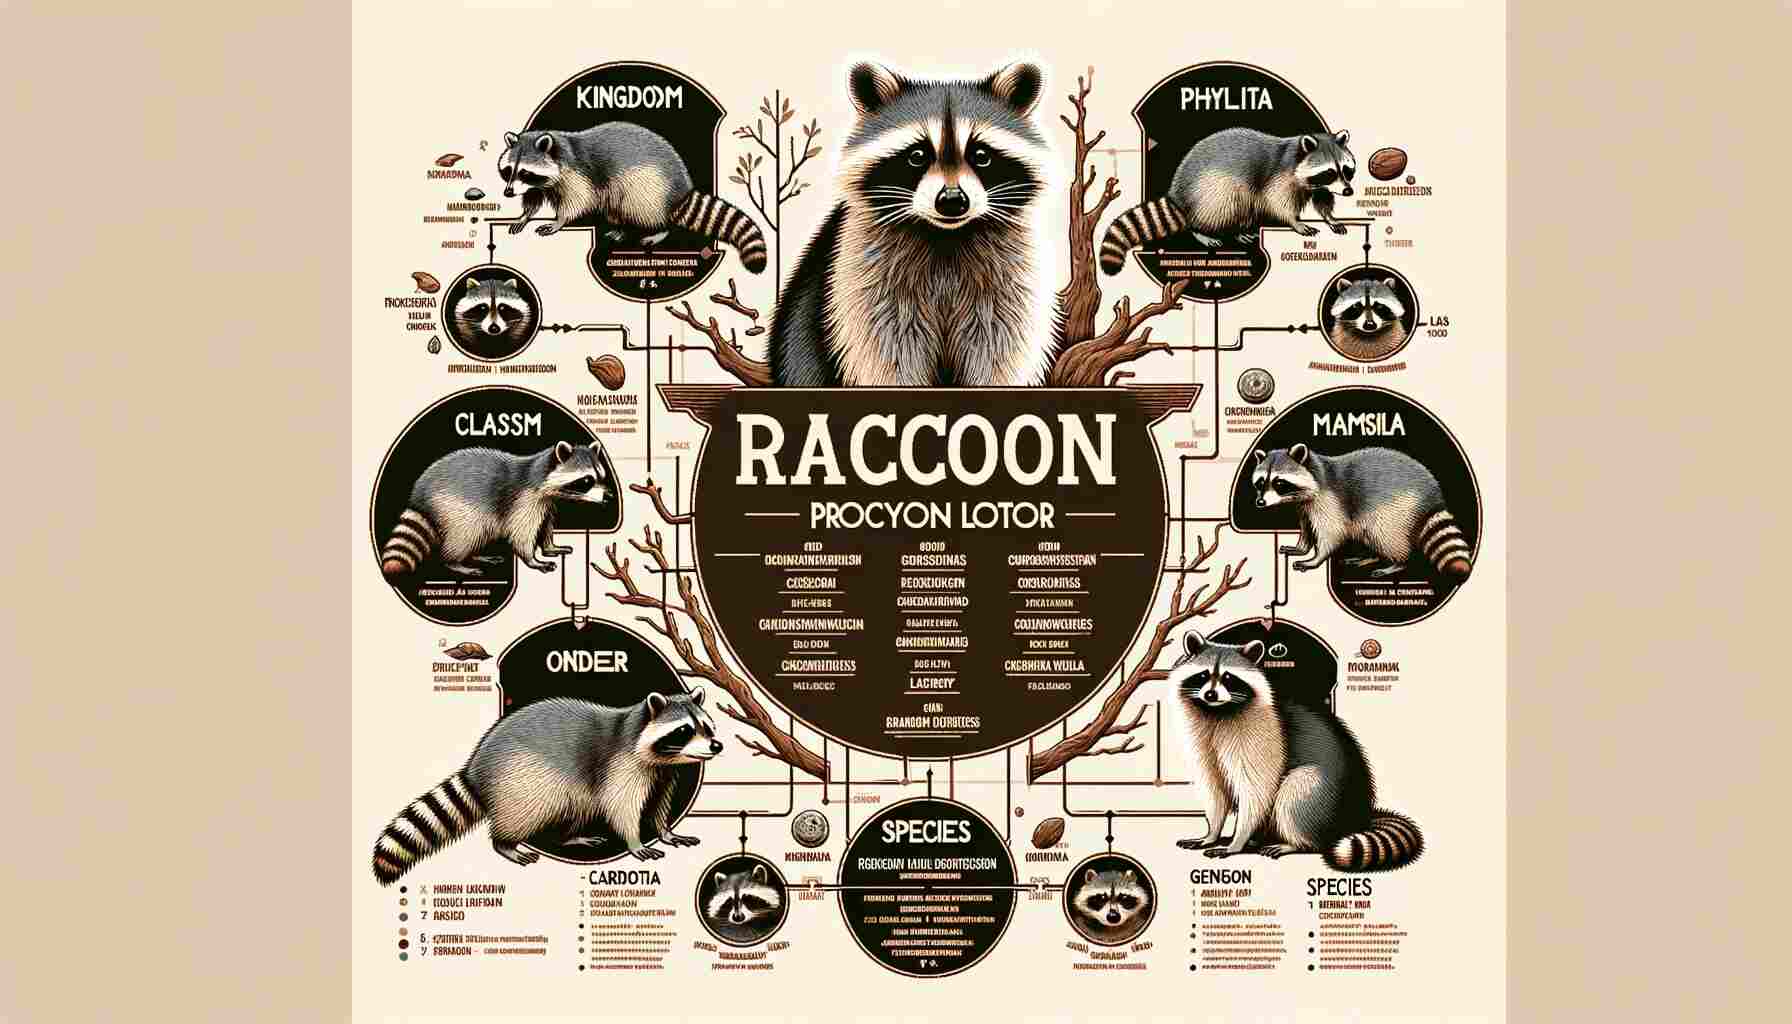 Here is the diagram or infographic detailing the taxonomic classification of raccoons, from Kingdom to Species. This educational visual clearly labels each level of classification, providing a concise and informative overview of the scientific categorization of the raccoon (Procyon lotor).